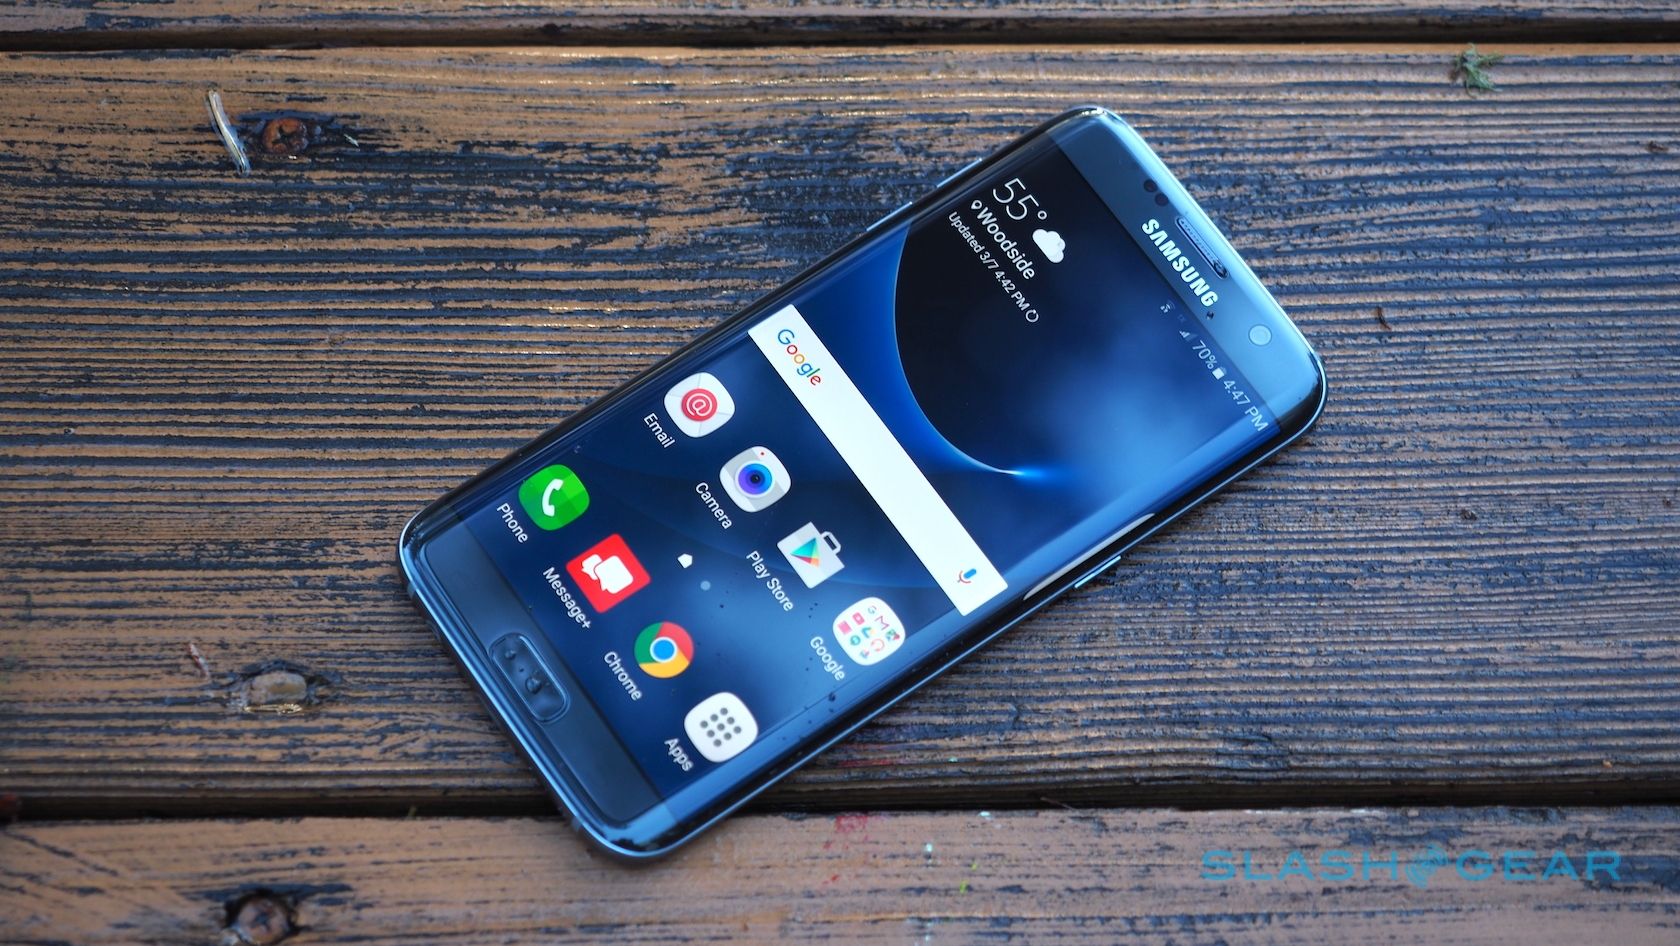 Samsung Galaxy S7 Edge Users Report Fast Charging Issues